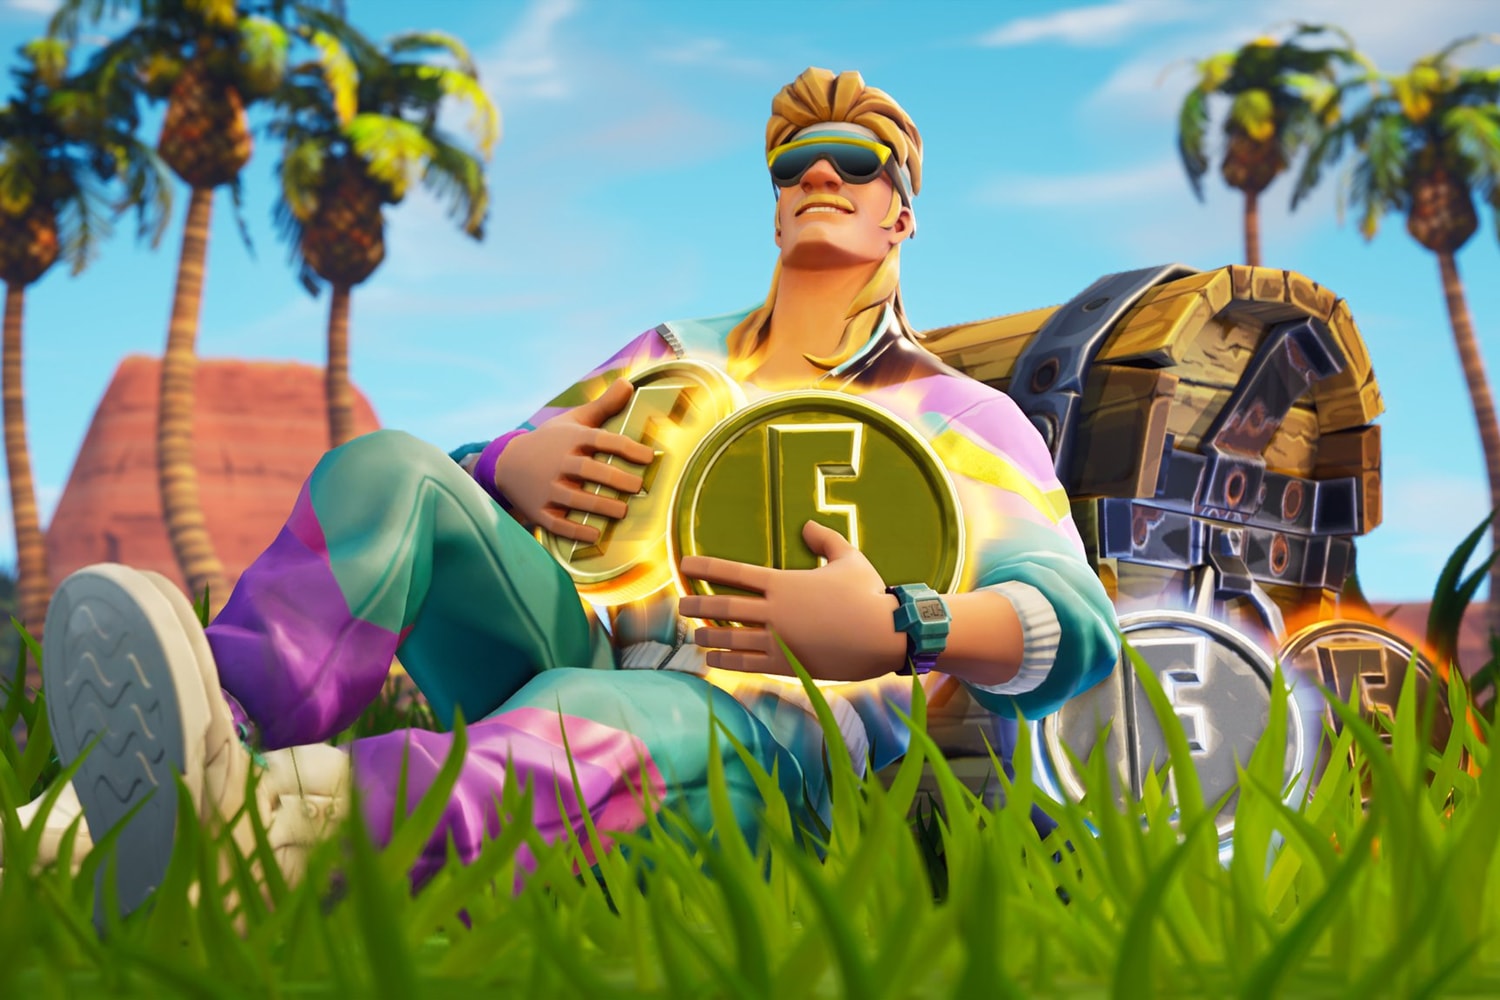 Epic Games Fortnite for Android–APK Downloads Leads to Malware